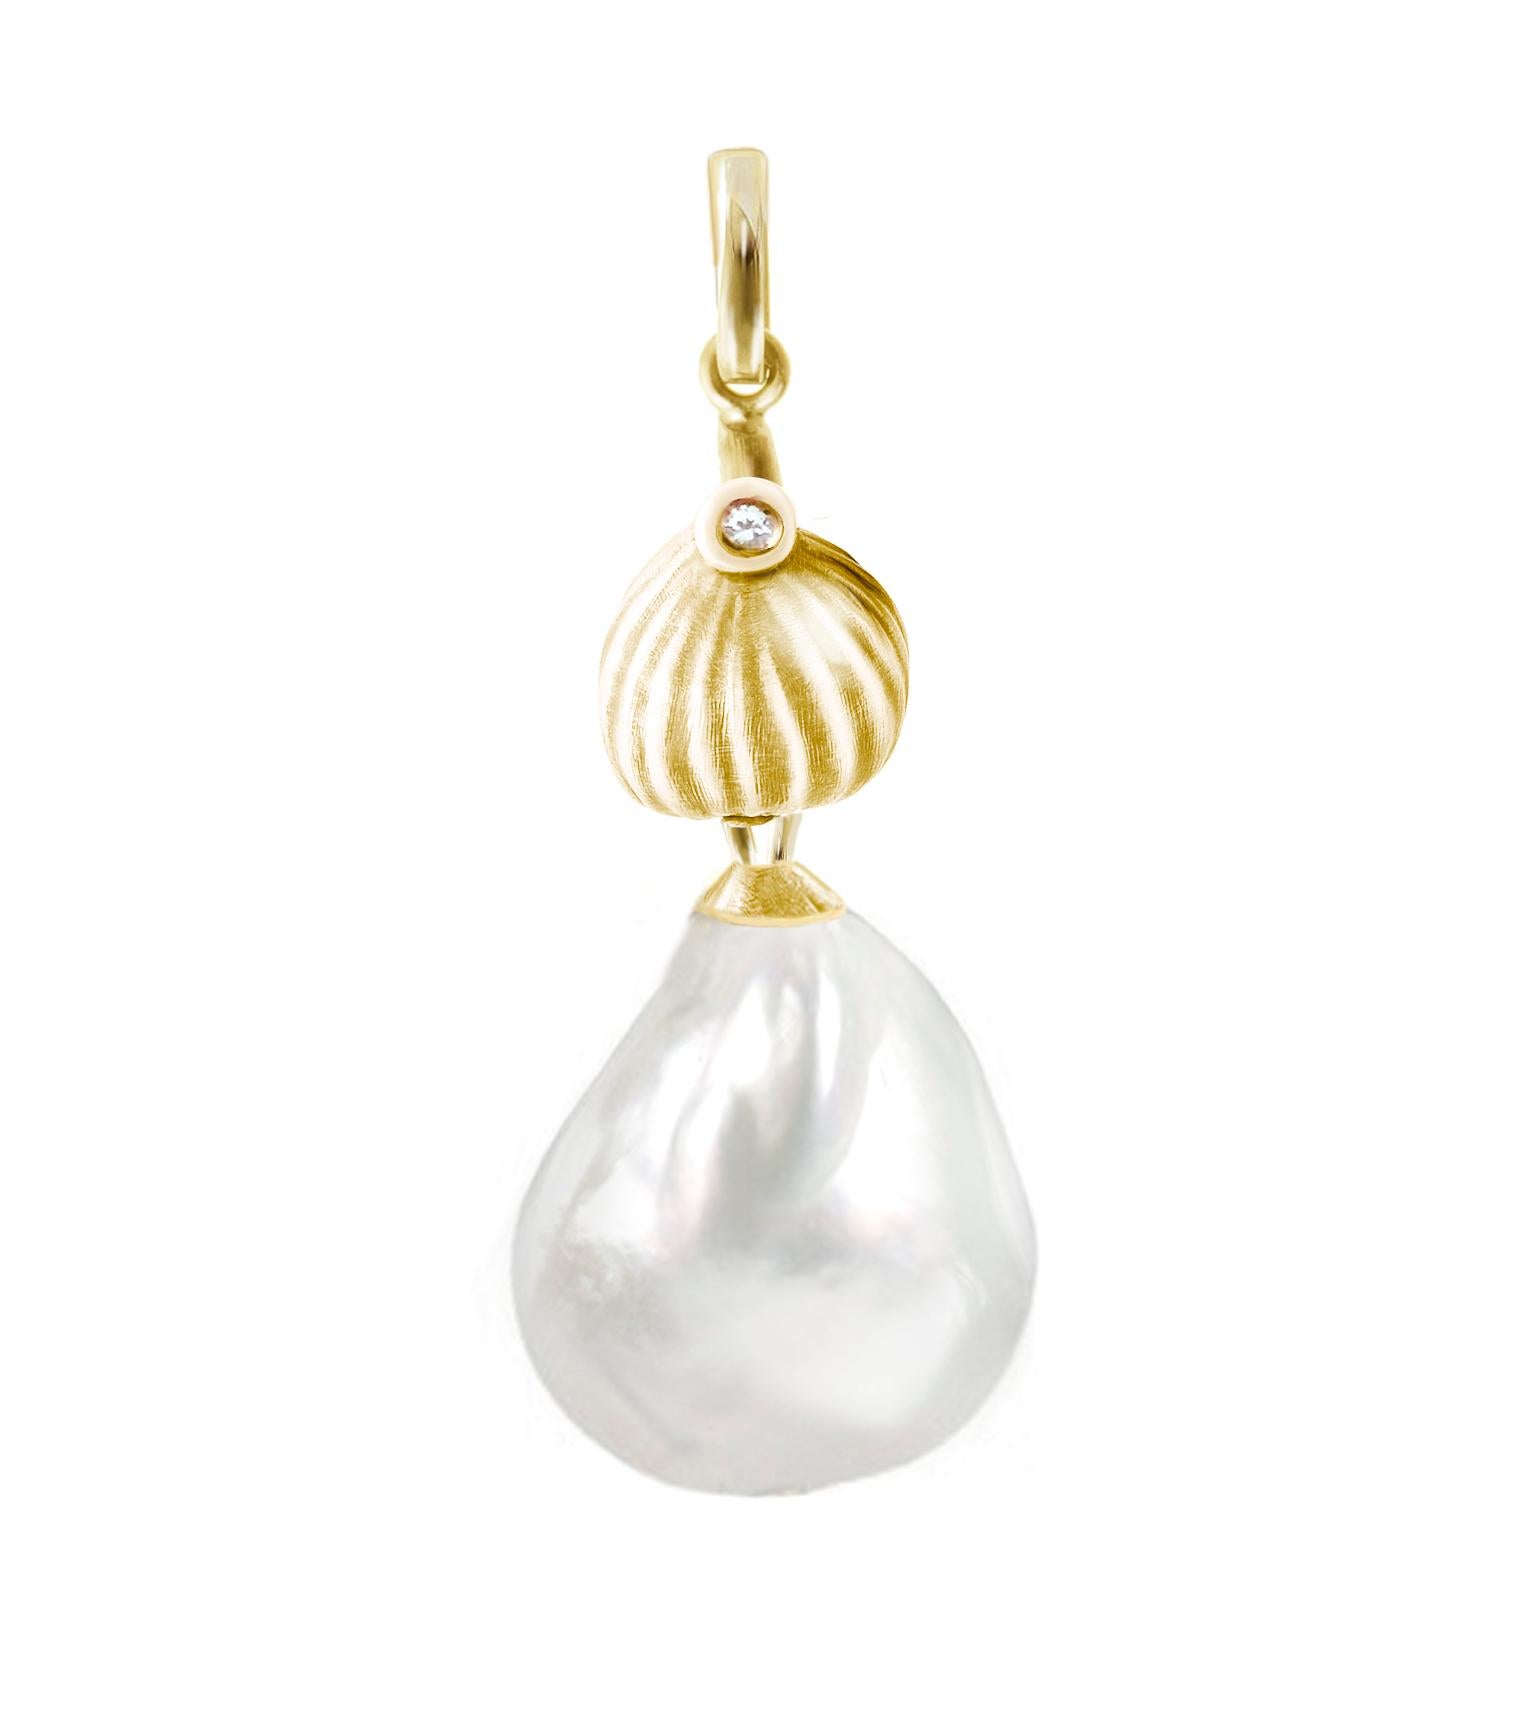 This 18 karat yellow gold contemporary pendant necklace is made with detachable south sea cultured baroque pearl and round diamond. The Fig collection was featured in Vogue UA review. The pearl was chosen for this pendant because of it's unique